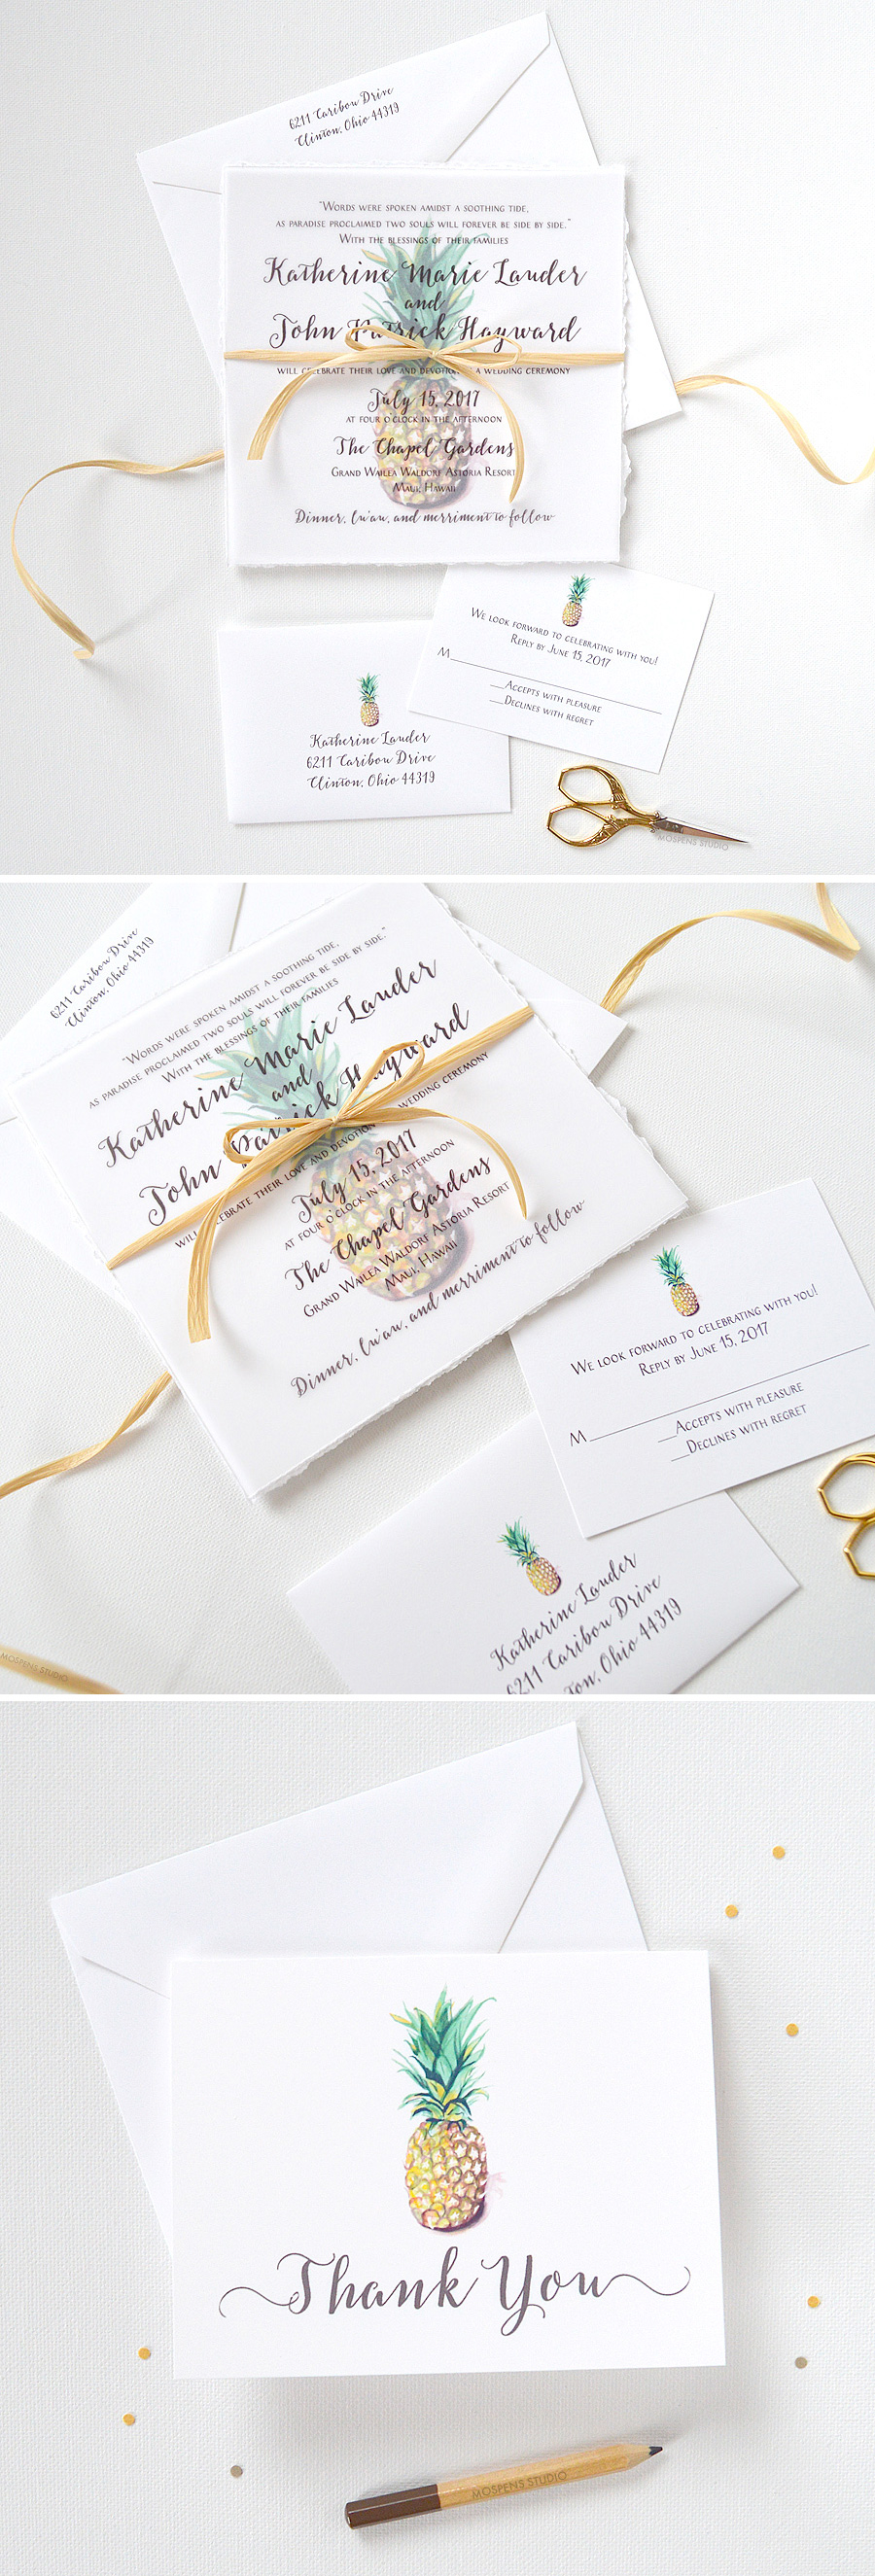 ALOHA! The Pineapple Wedding Invitation design features hand-torn deckled edges, pineapple watercolor art, and lovely hand-tied wraphia. Overlay with text reveals a pineapple print keepsake for your guests. Now available! - www.mospensstudio.com